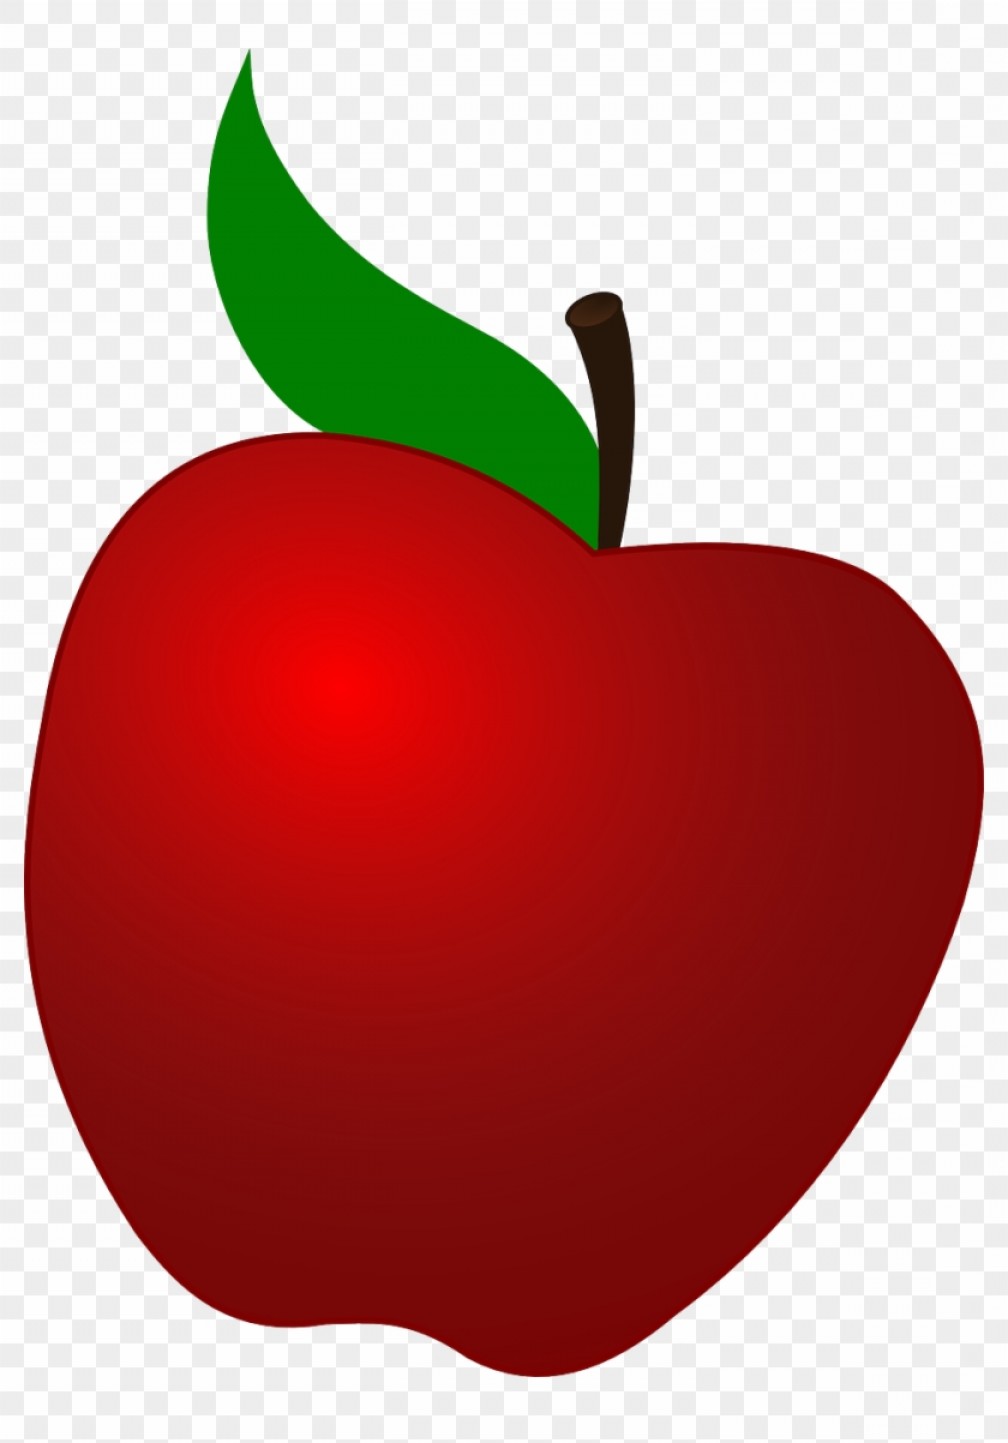 Clipart apples vector, Clipart apples vector Transparent FREE for ...